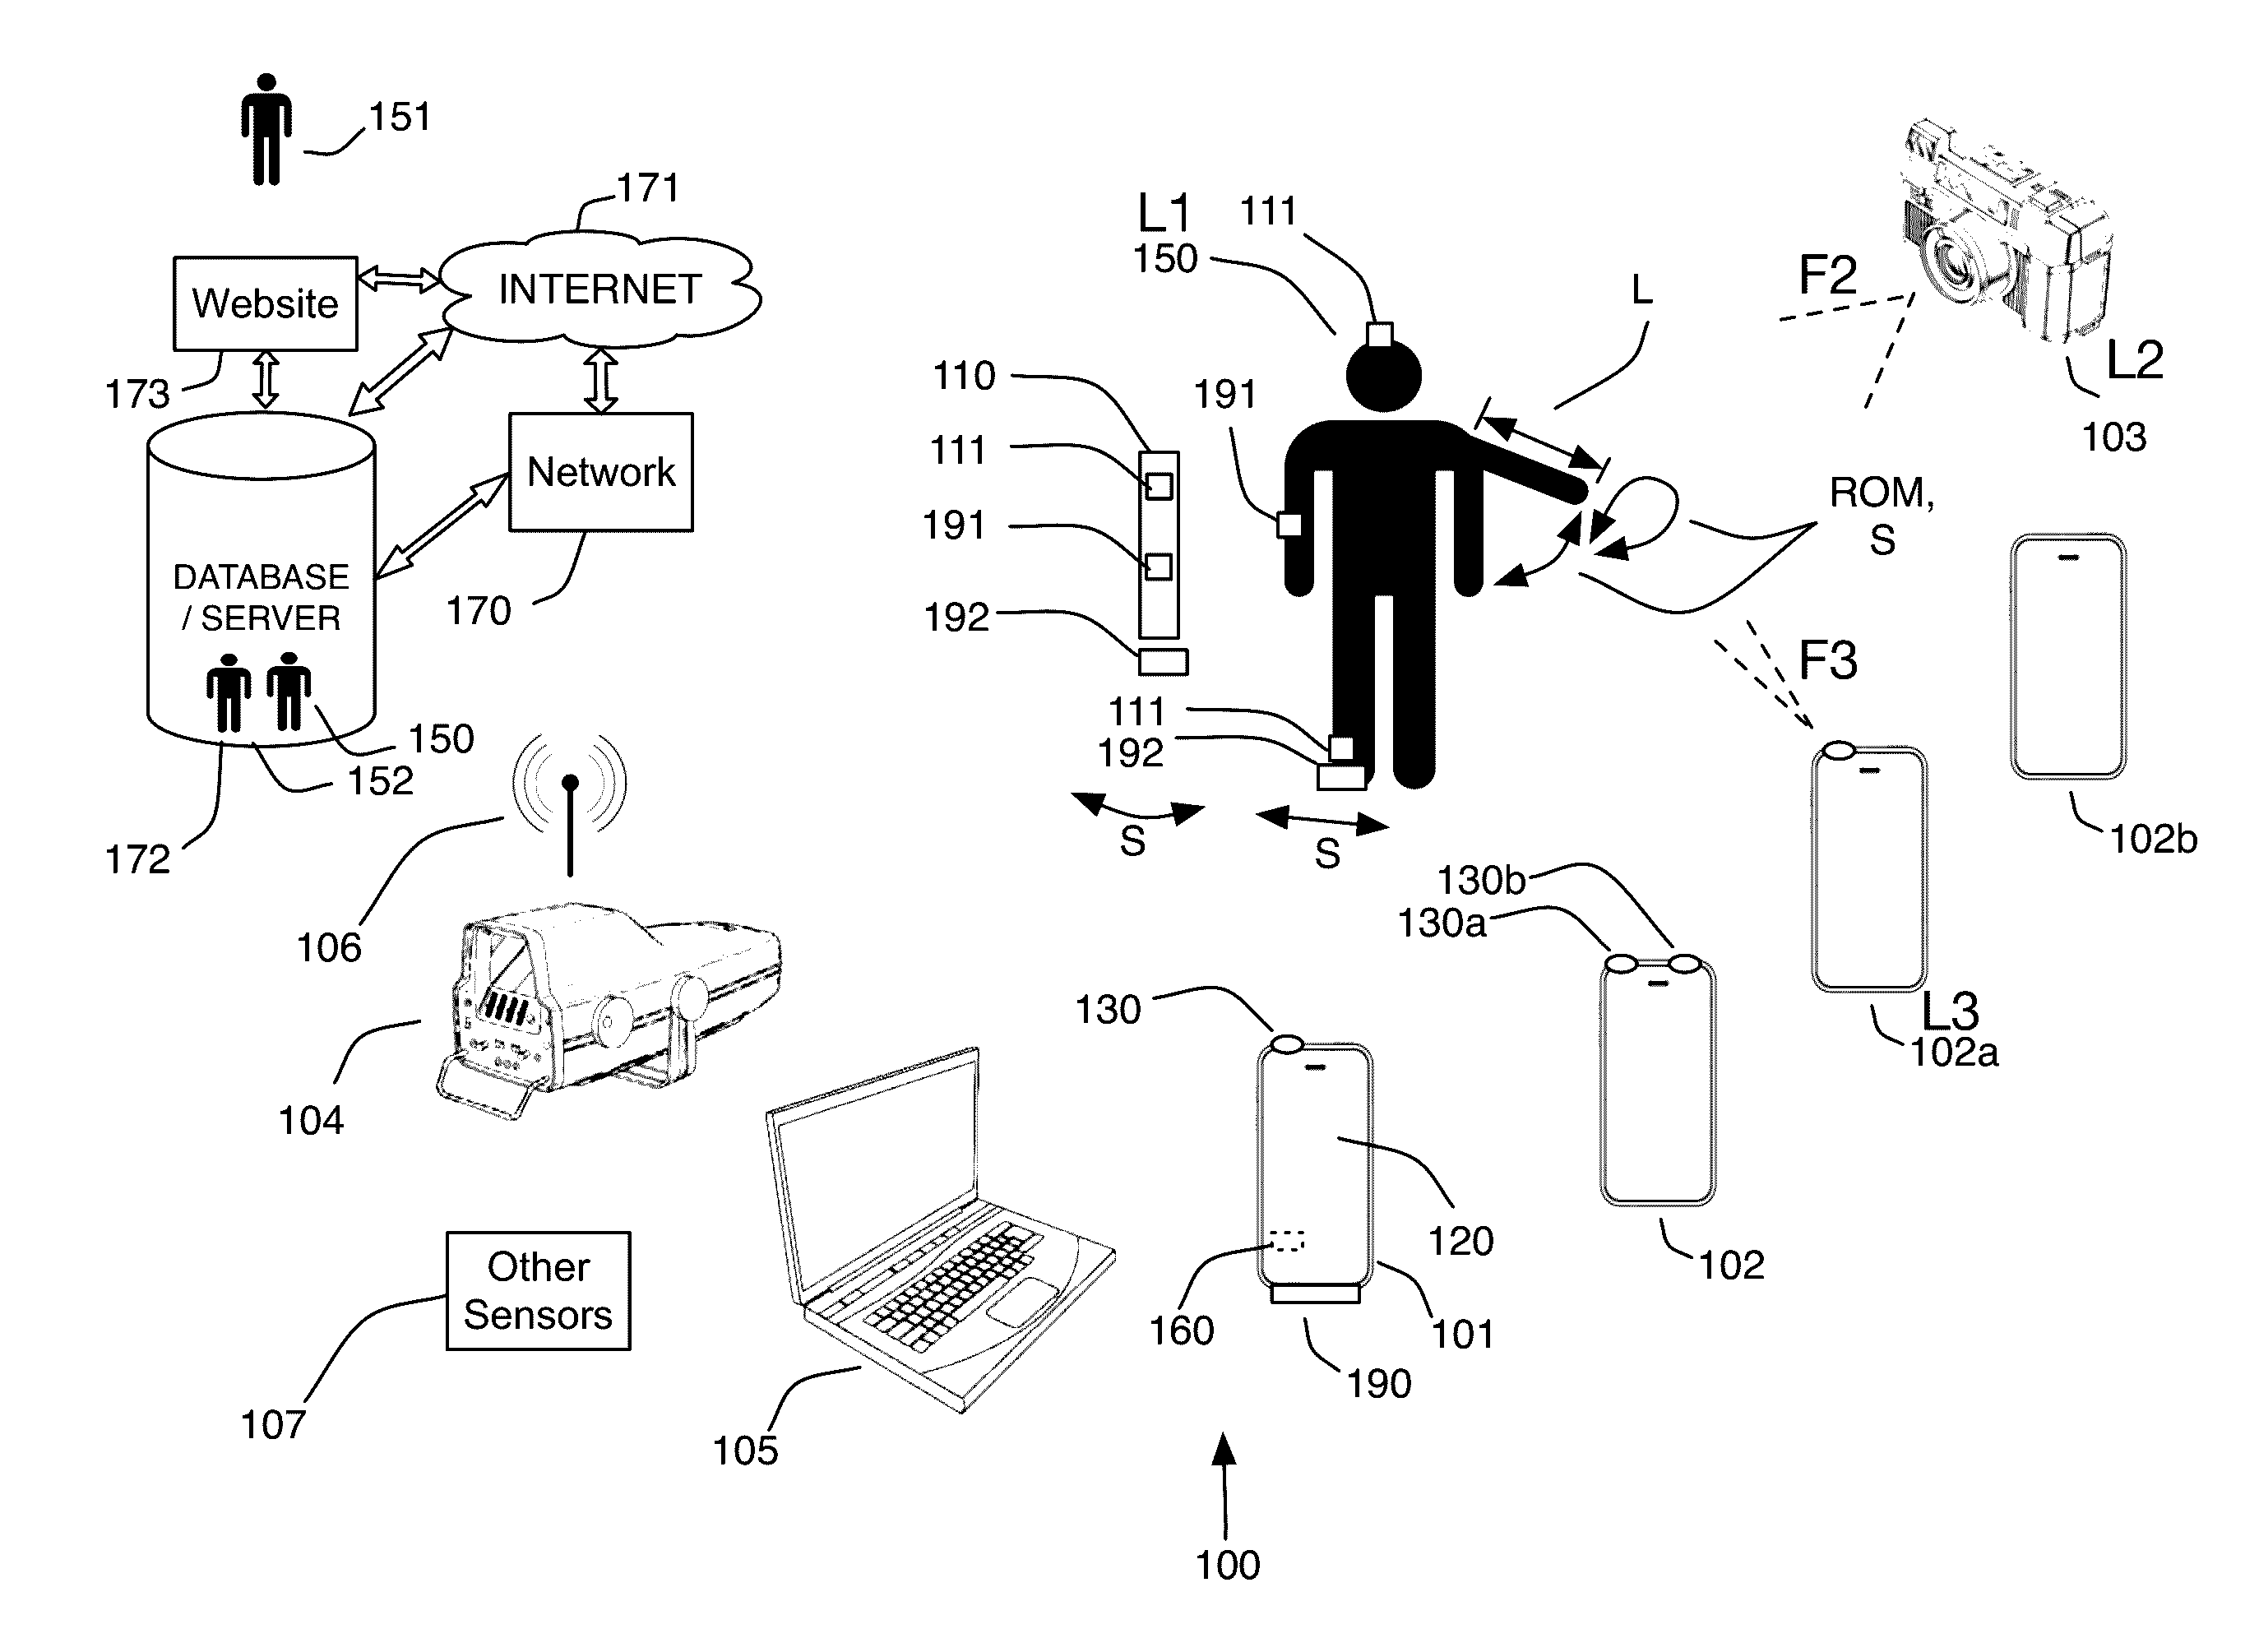 Multi-sensor event detection and tagging system